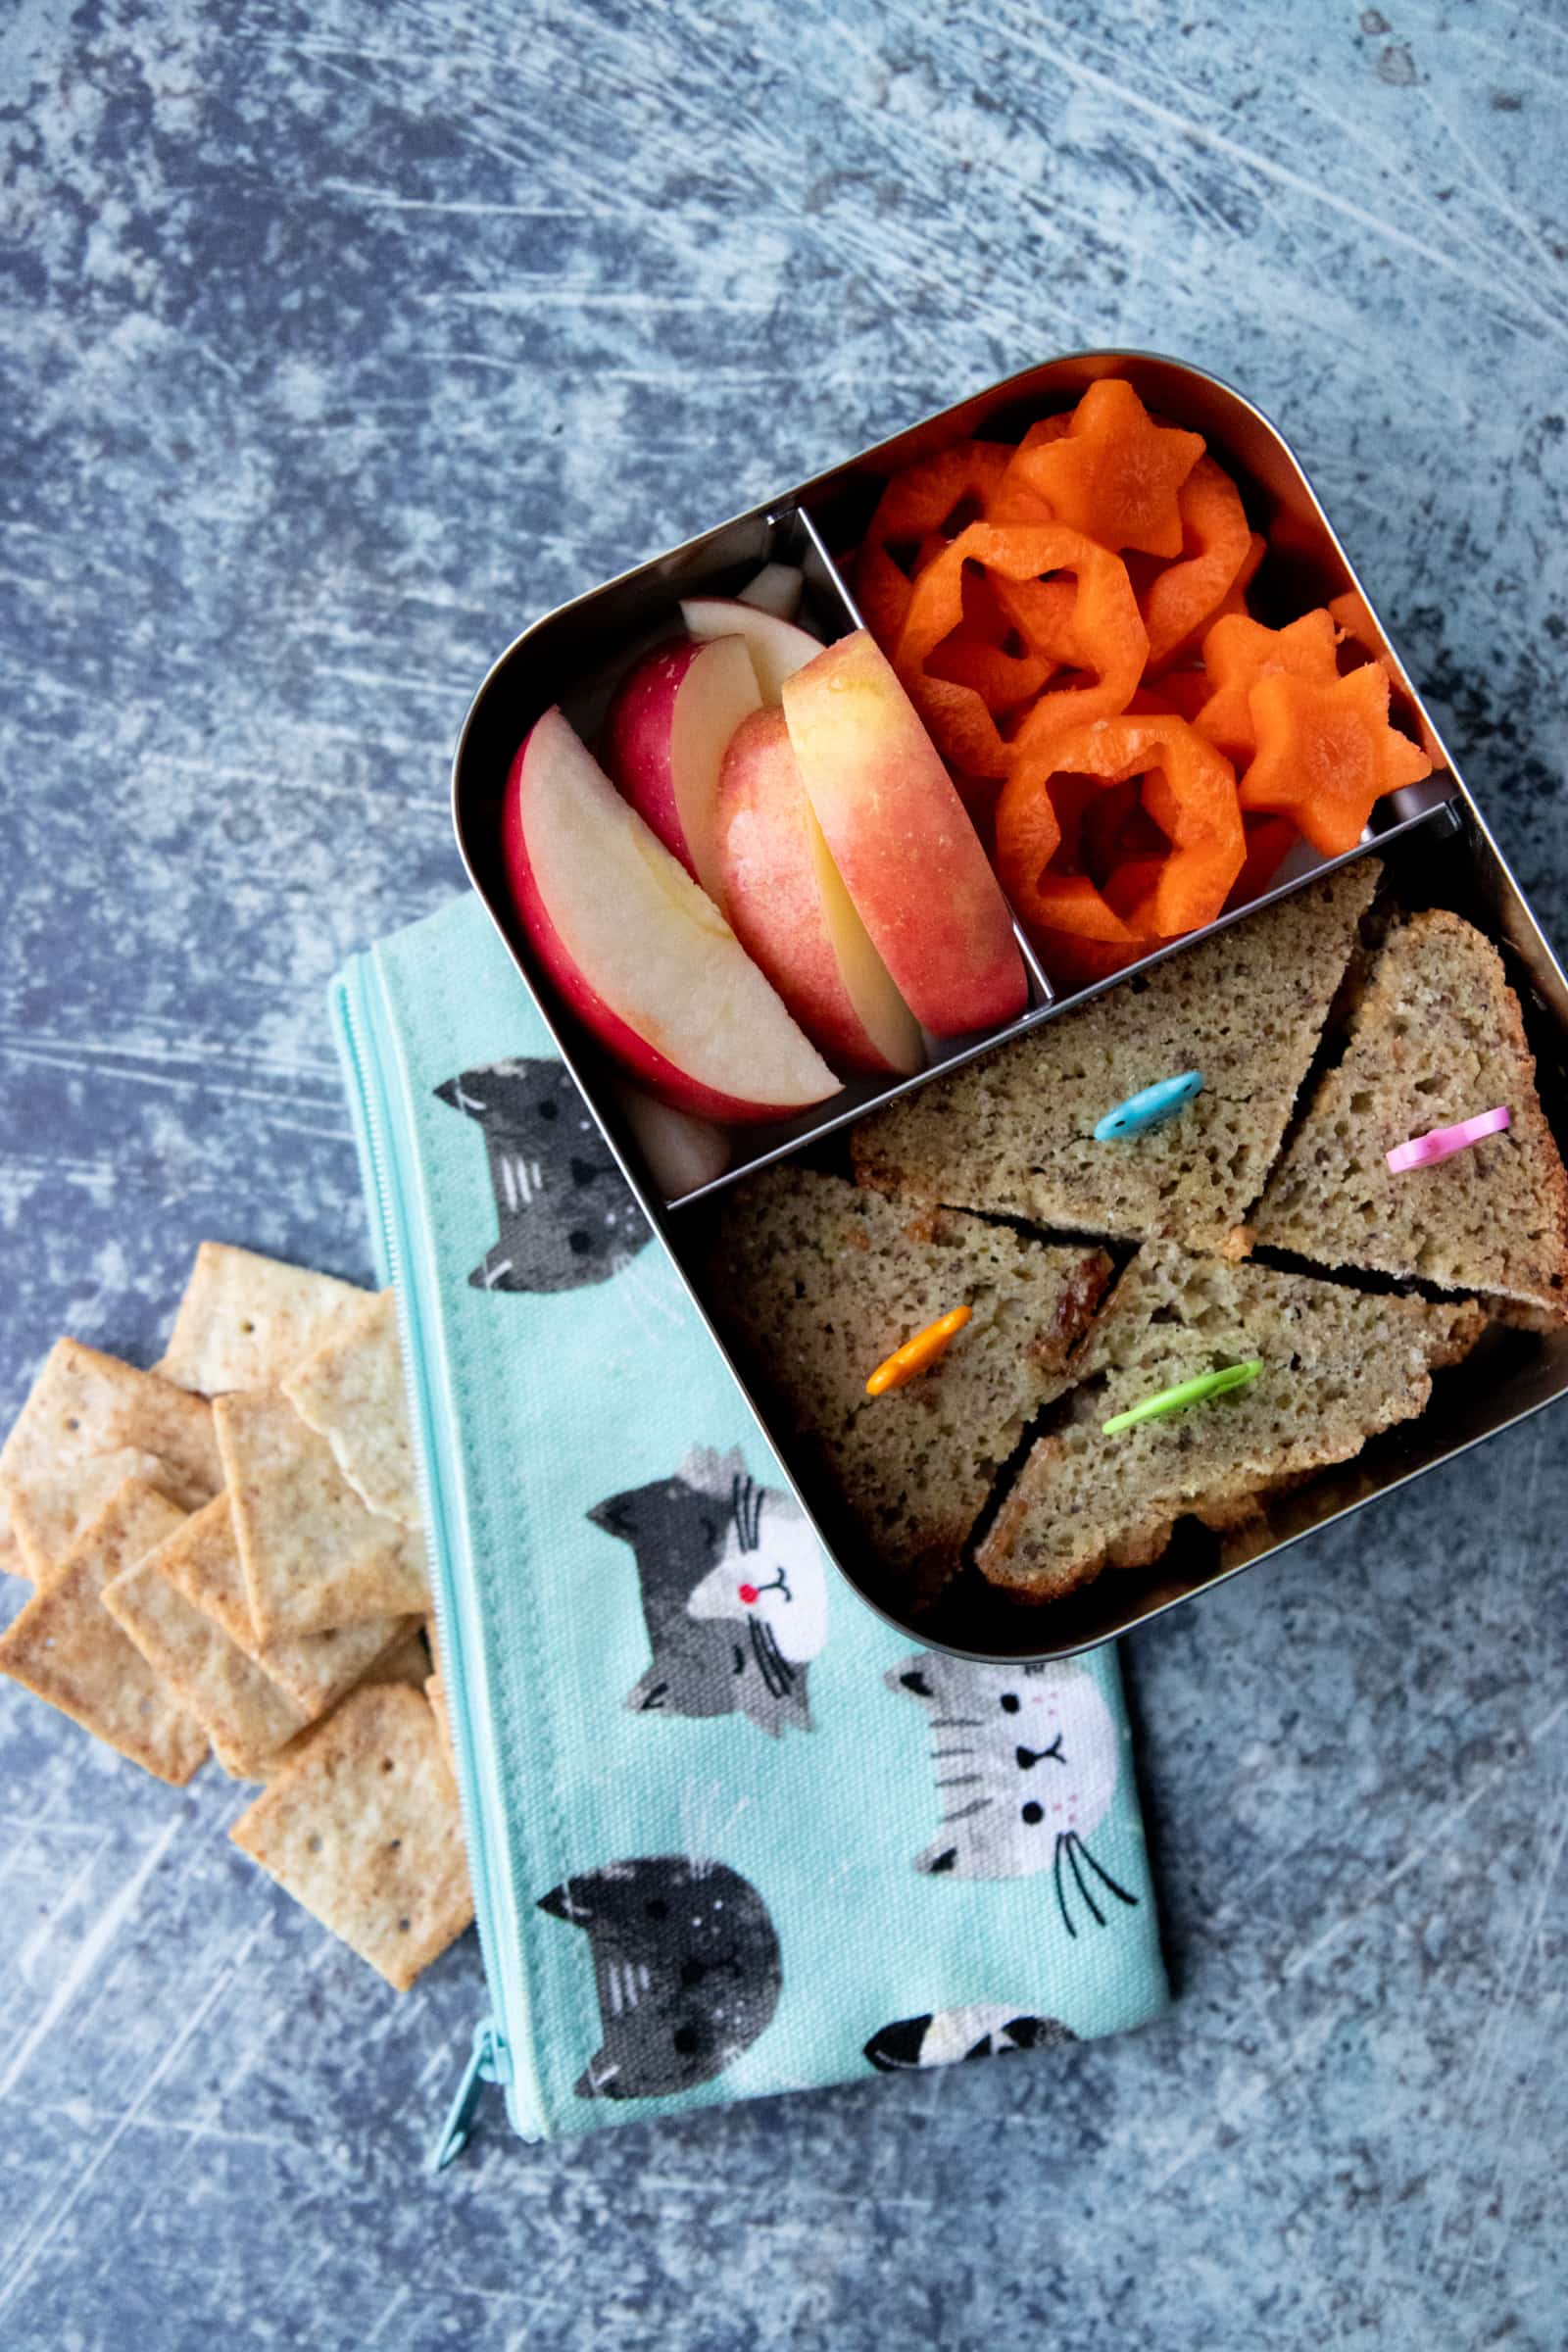 Steel lunchbox on top of a bag of crackers. The lunch box holds a sandwich, apple slices, and carrots cut into stars.